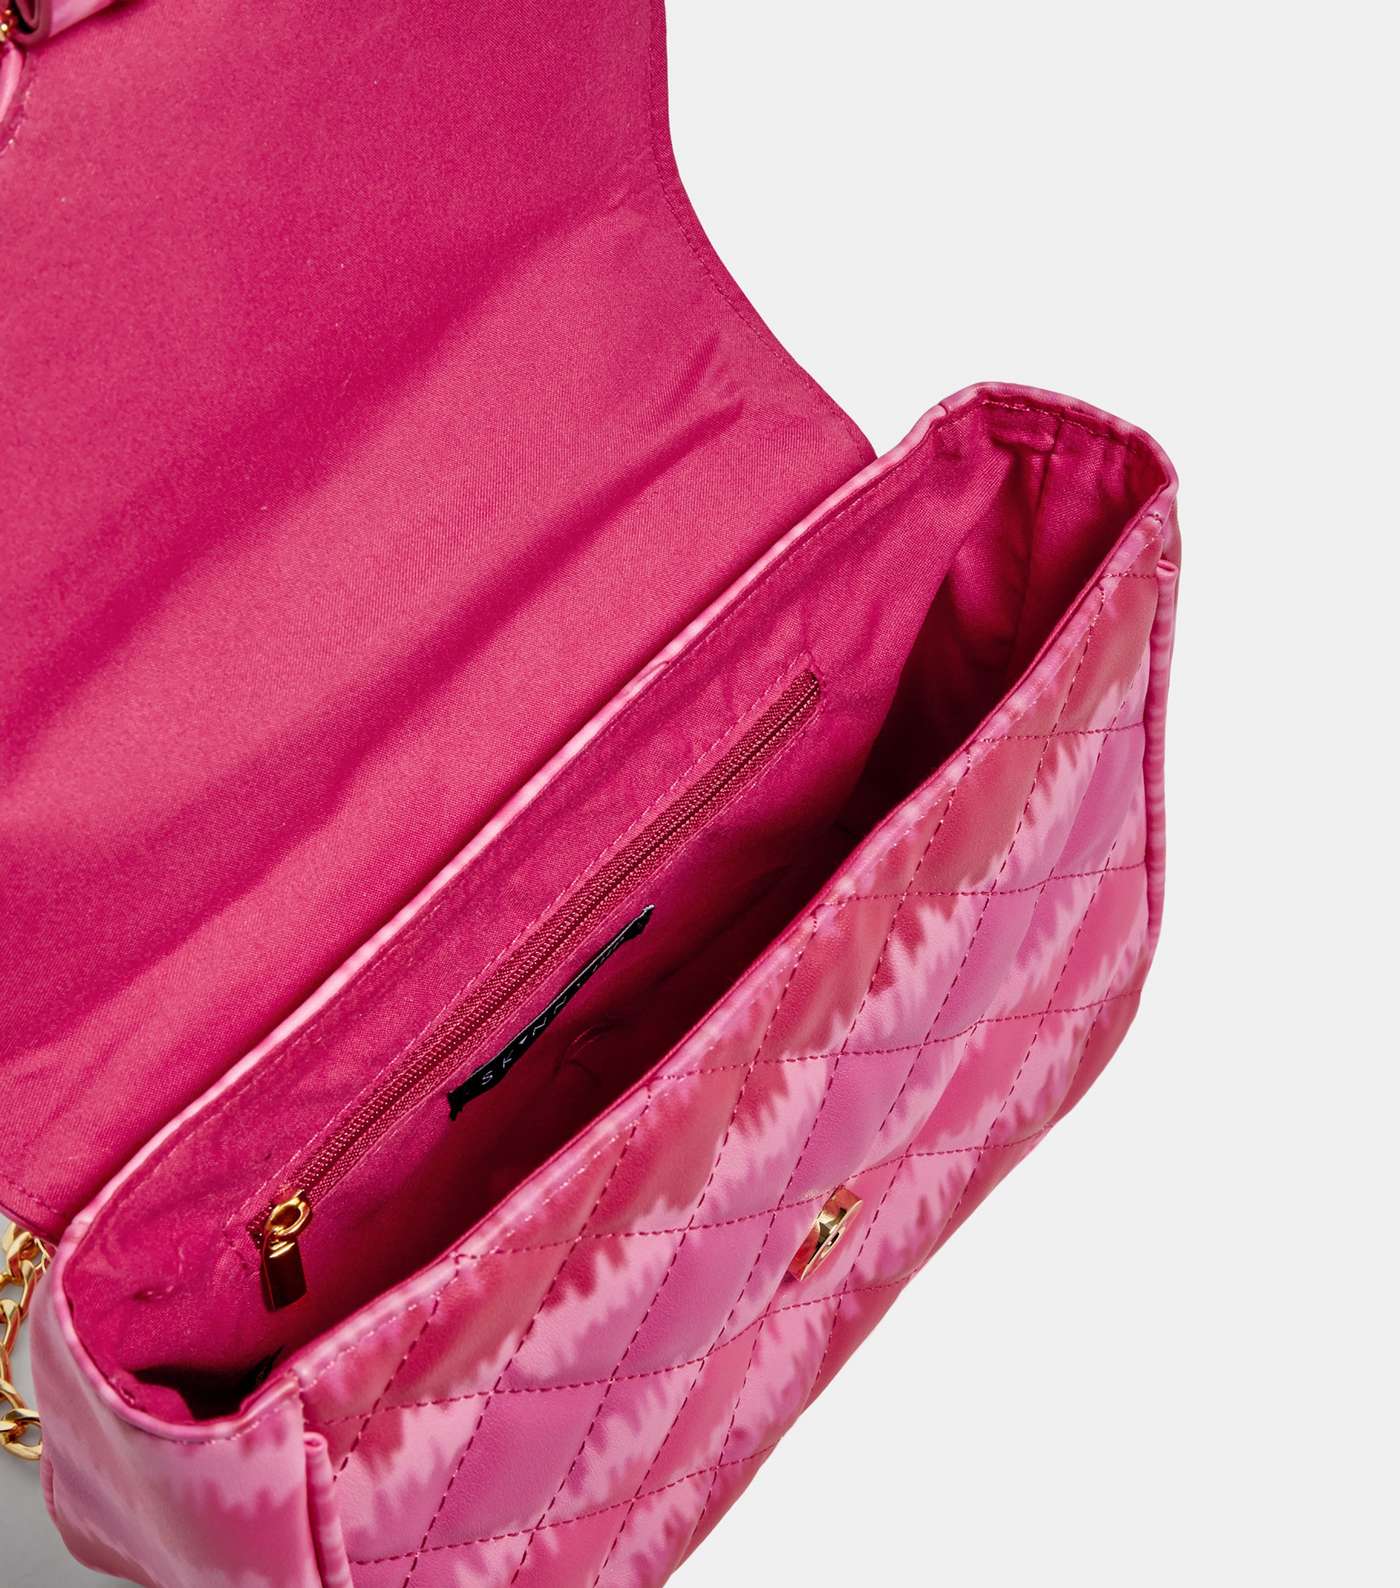 Skinnydip Pink Leather-Look Ombré Cross Body Bag Image 3